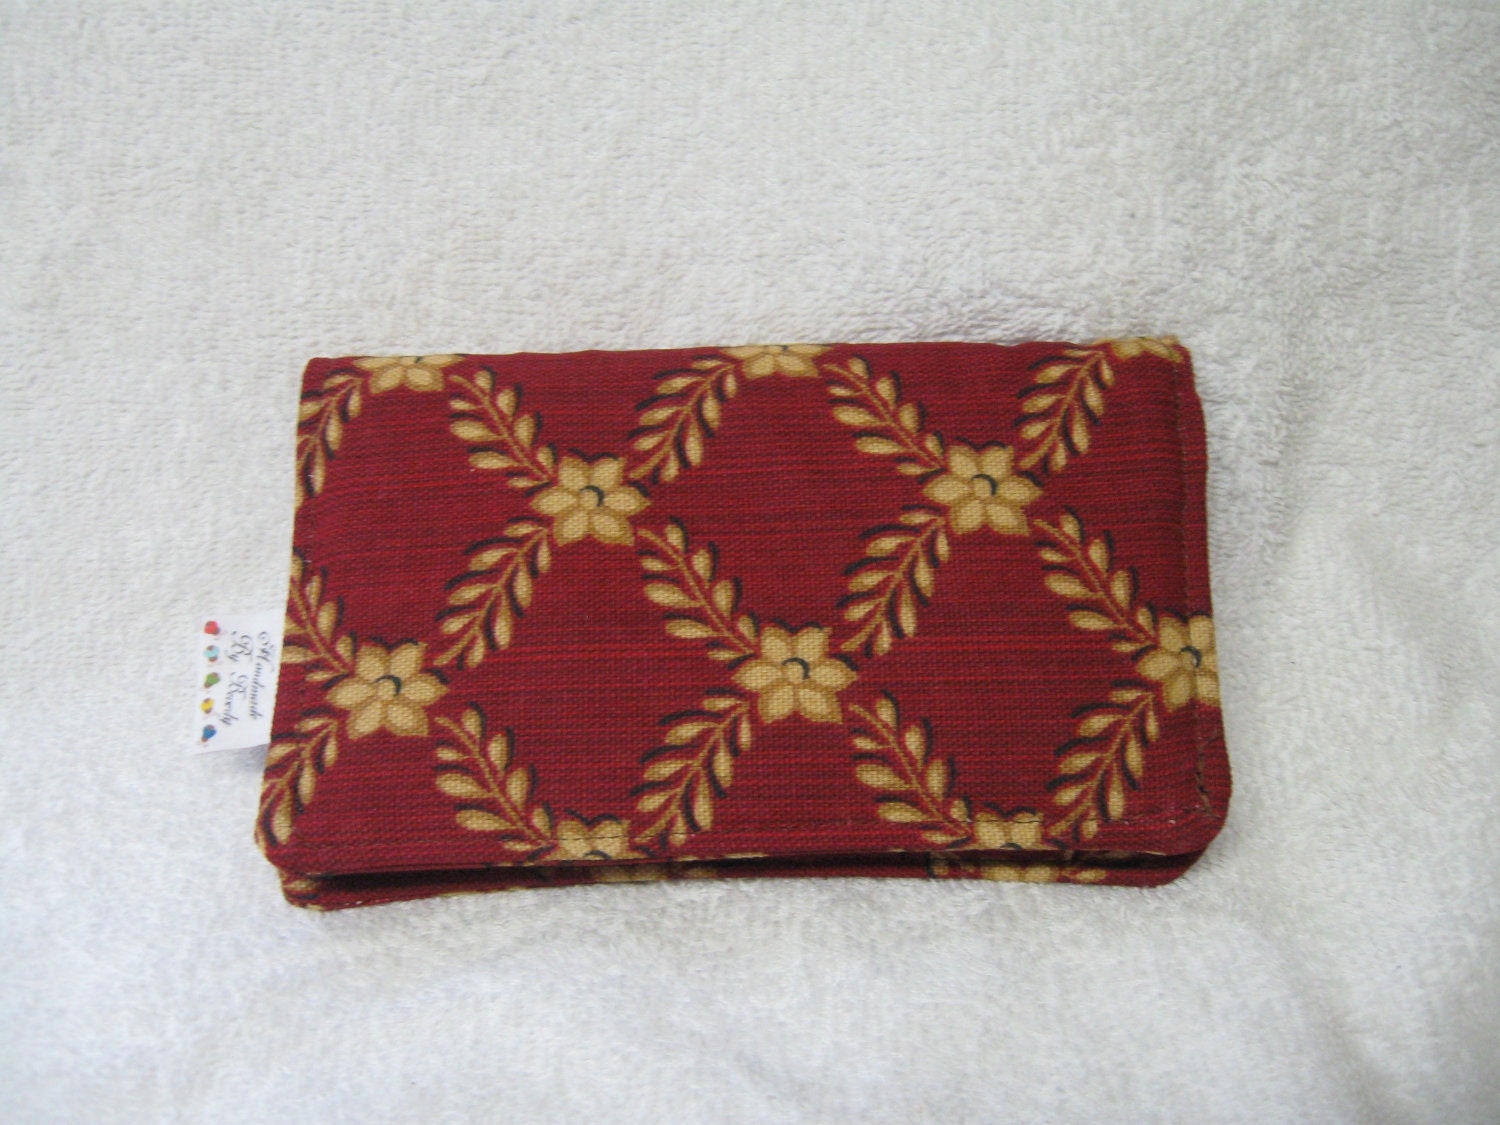 Checkbook Cover Burnt Orange and Gold Print Fabric Checkbook Cover